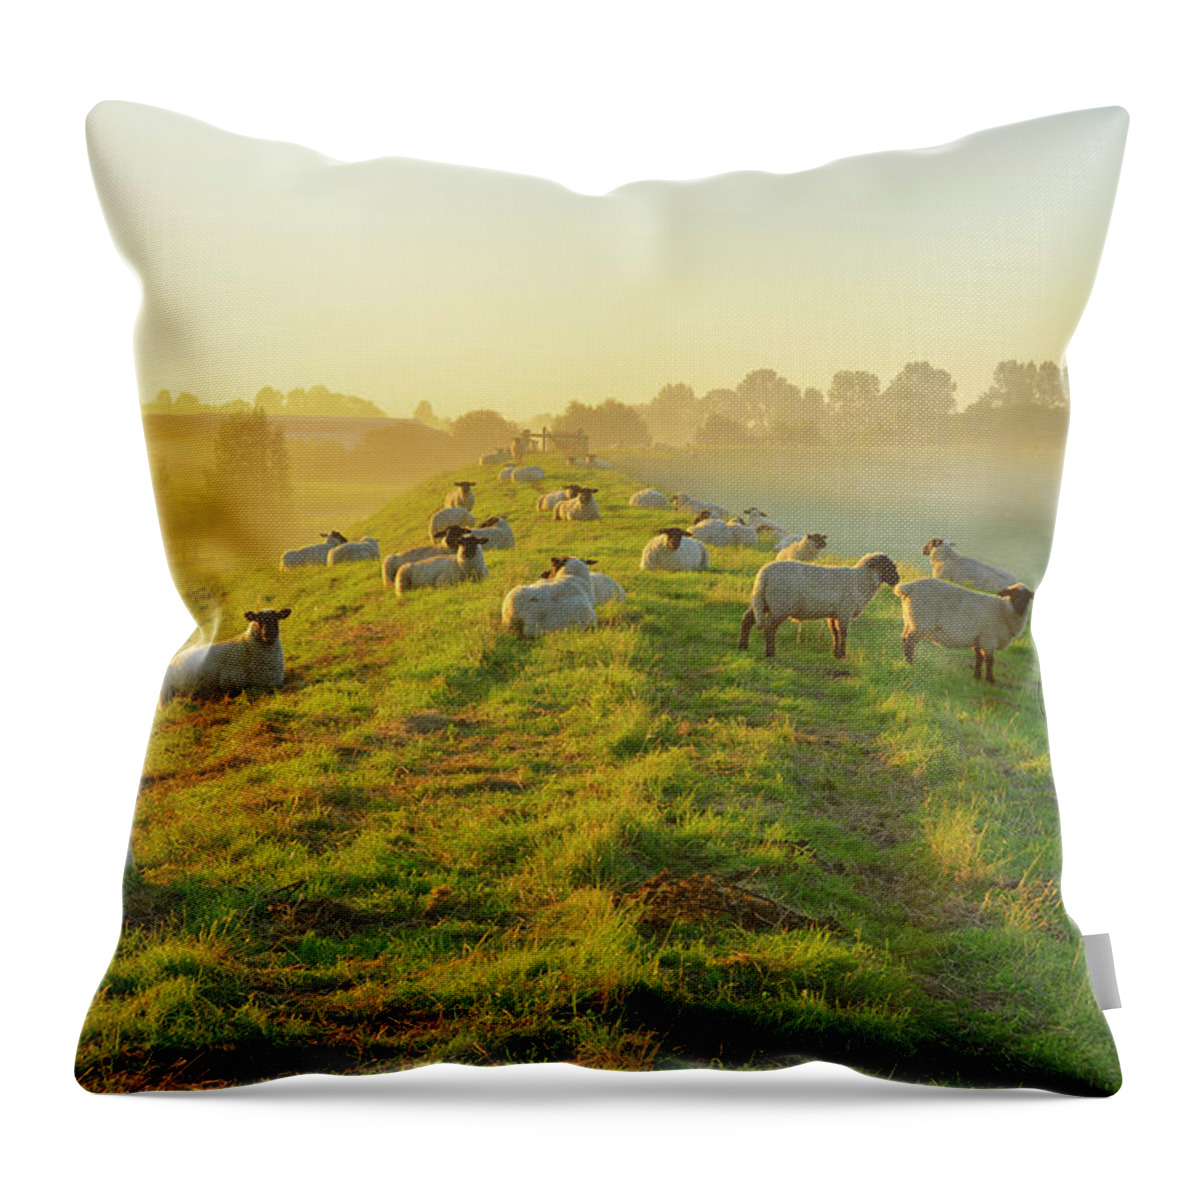 Scenics Throw Pillow featuring the photograph North Sea Dyke With Sheeps by Raimund Linke